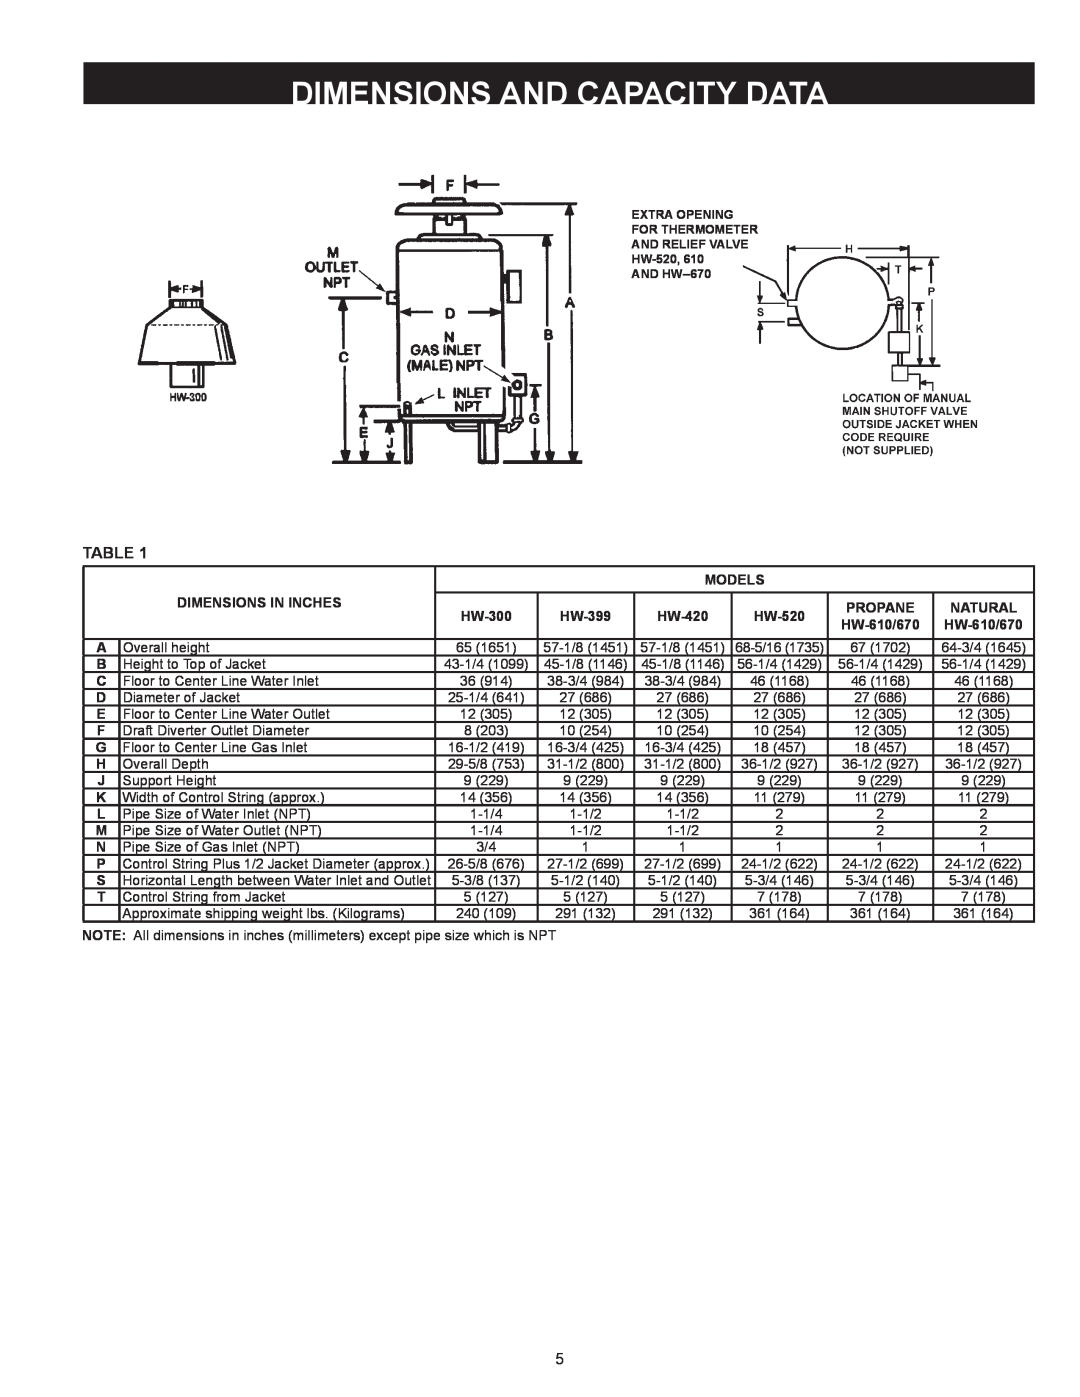 A.O. Smith HW 610 warranty Dimensions And Capacity Data, EXTRA OPENING FOR THERMOMETER AND RELIEF VALVE HW-520 AND HW--670 